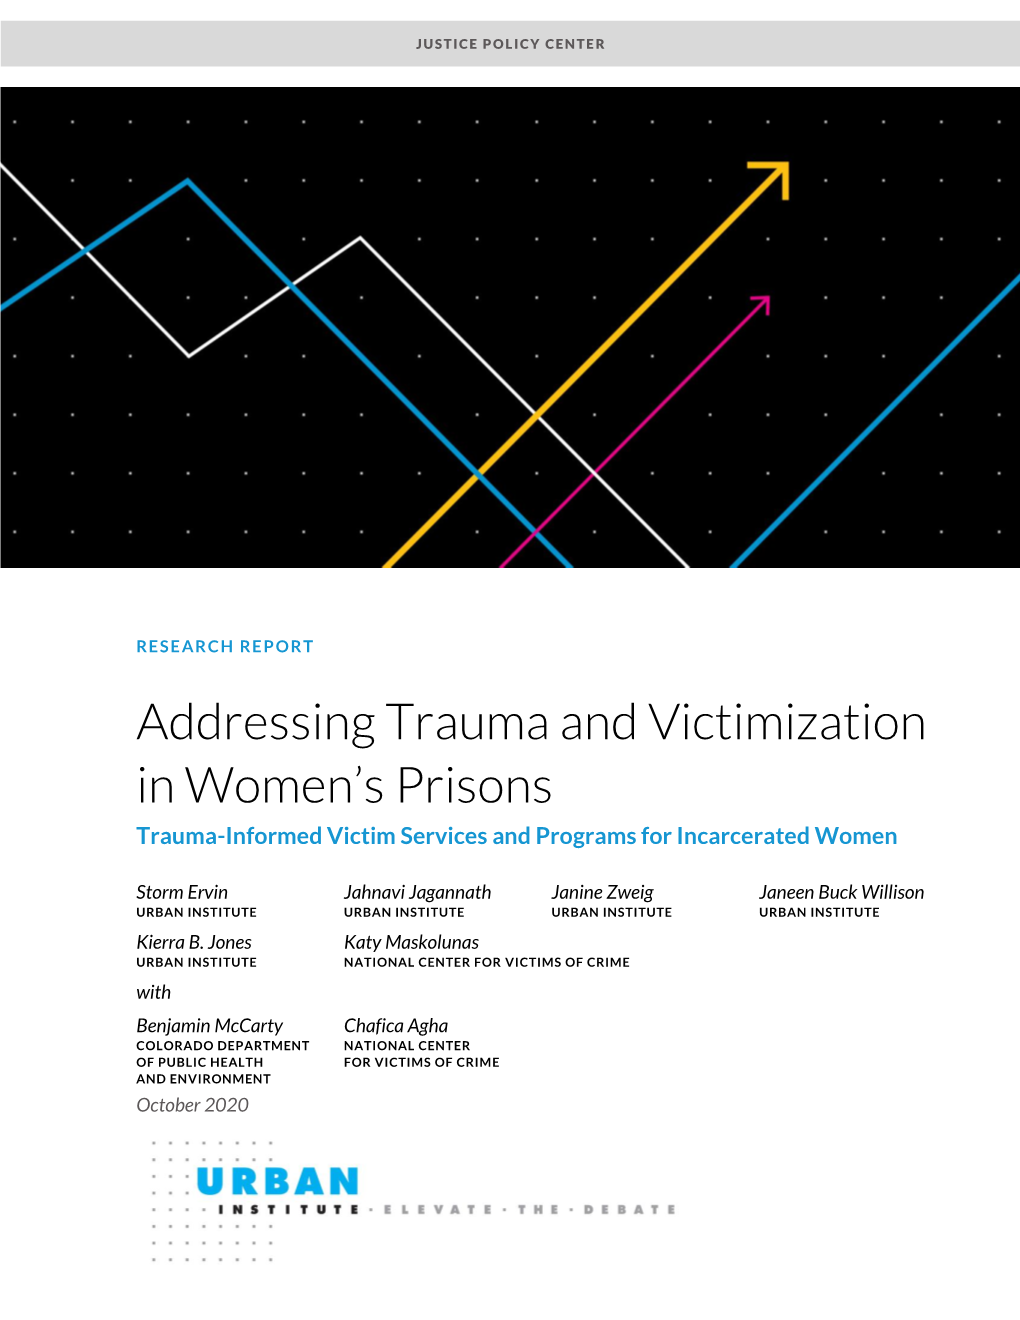 Addressing Trauma and Victimization in Women's Prisons